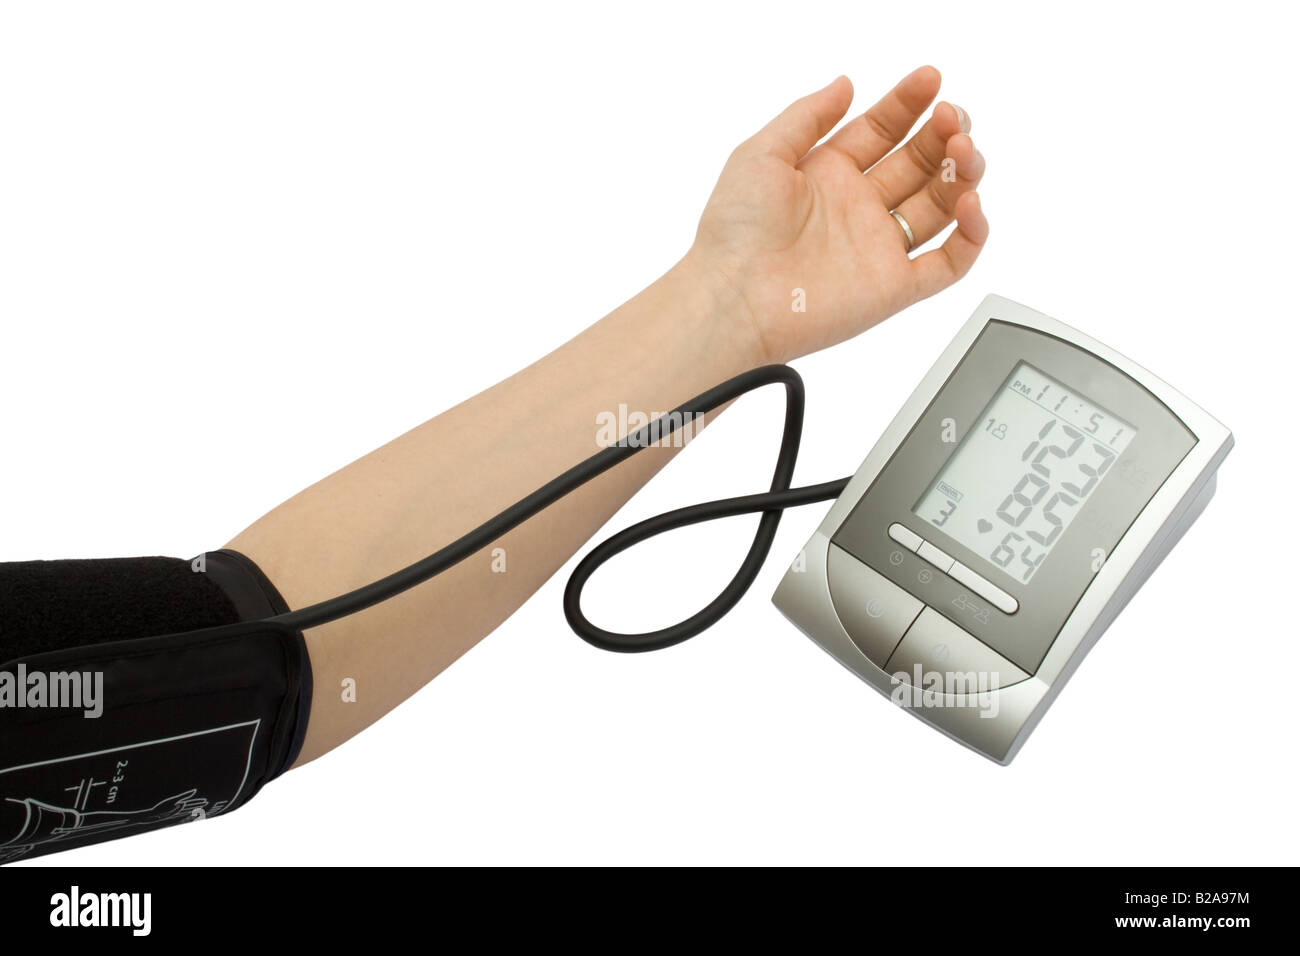 https://c8.alamy.com/comp/B2A97M/checking-the-blood-pressure-with-an-electronic-sphygmomanometer-blood-B2A97M.jpg